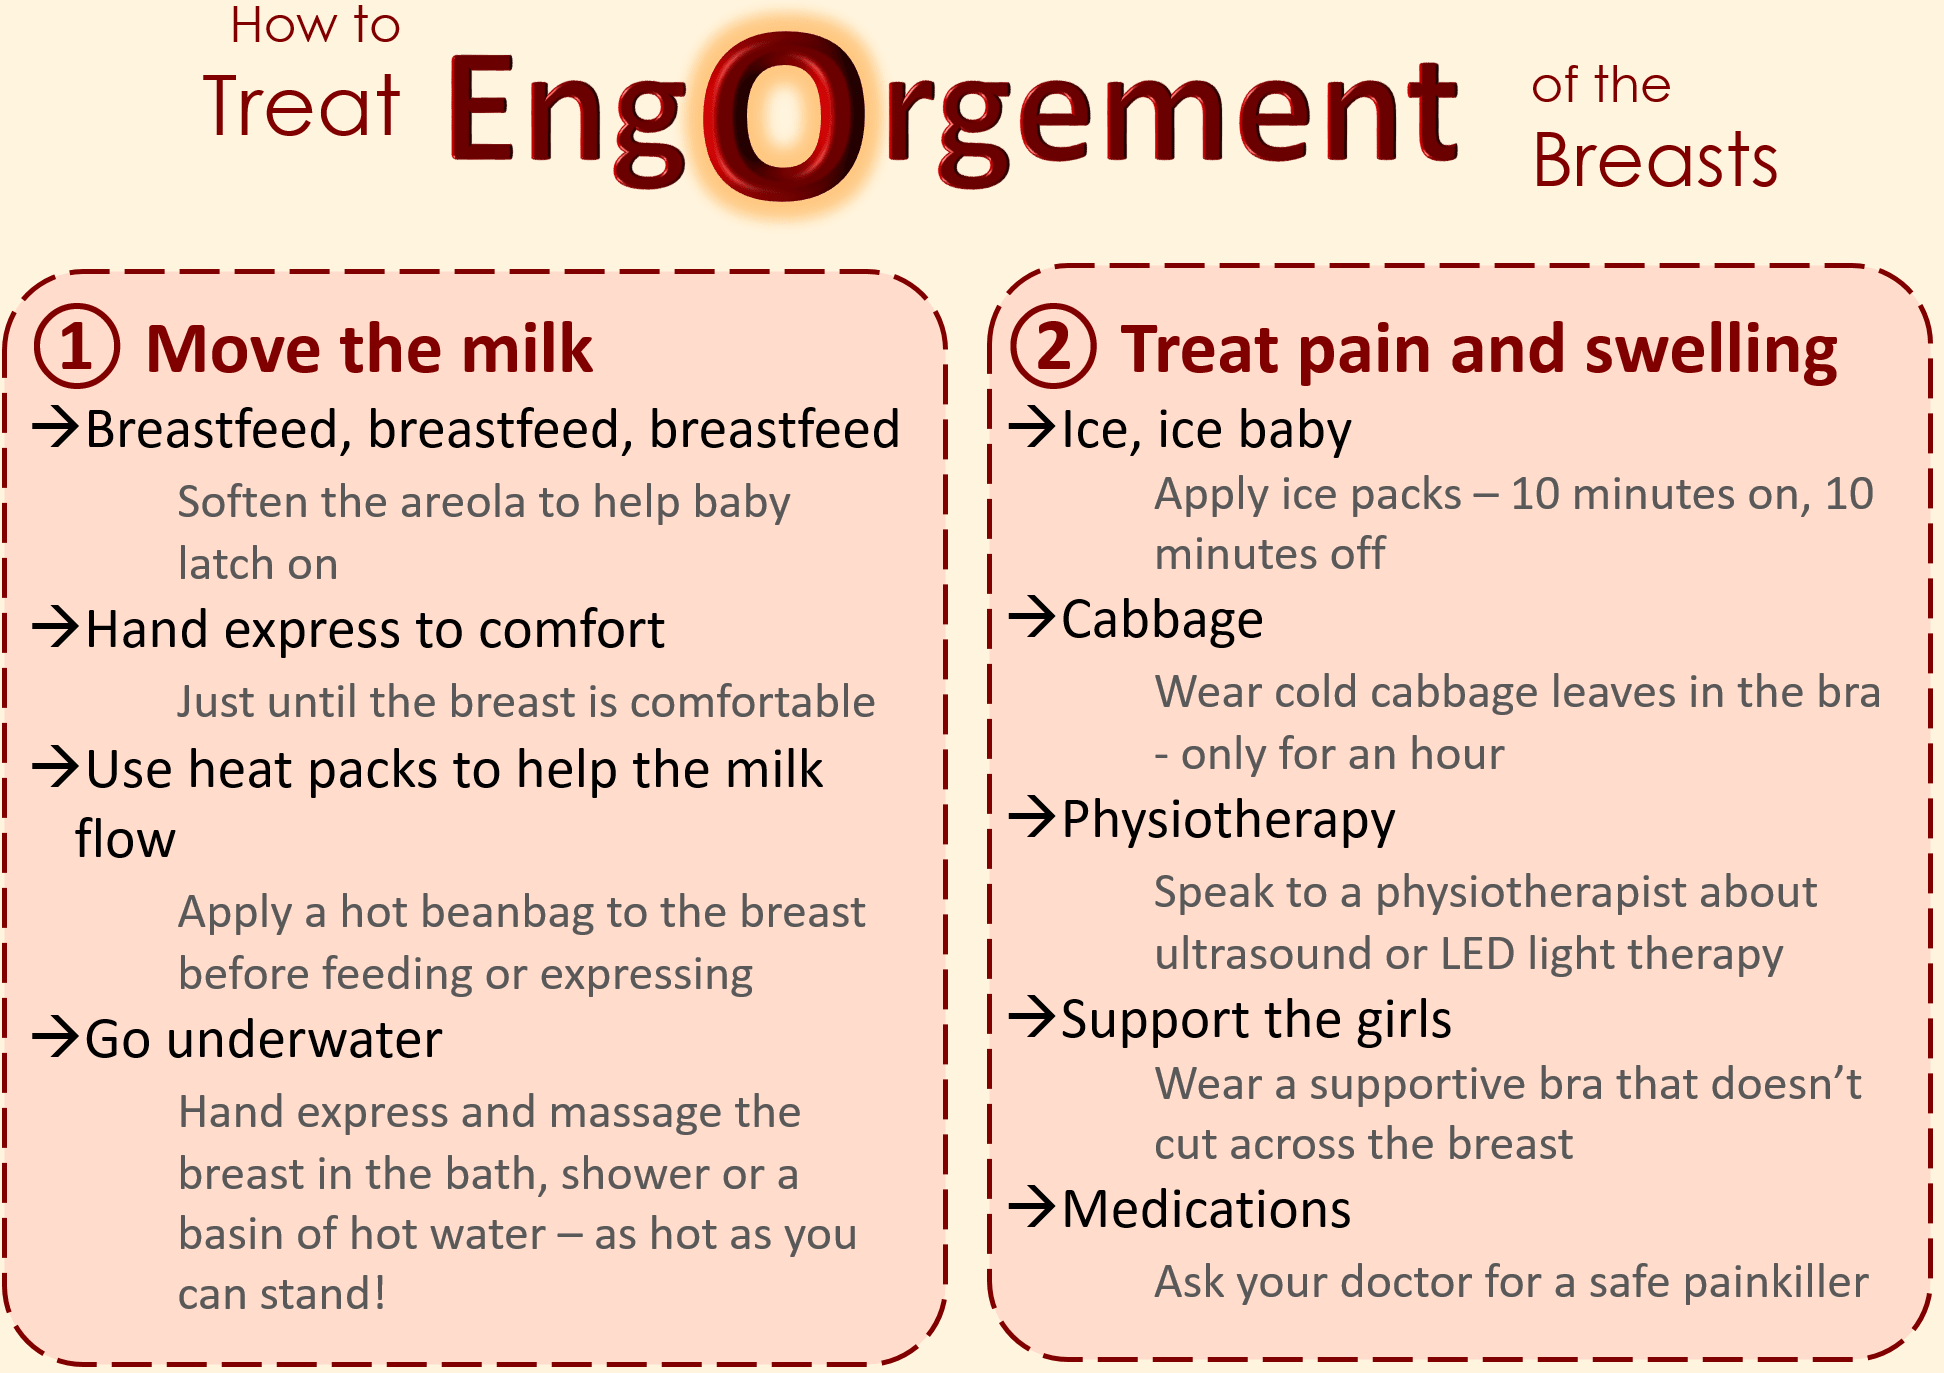 10 Common Breastfeeding Problems & How to Solve Them